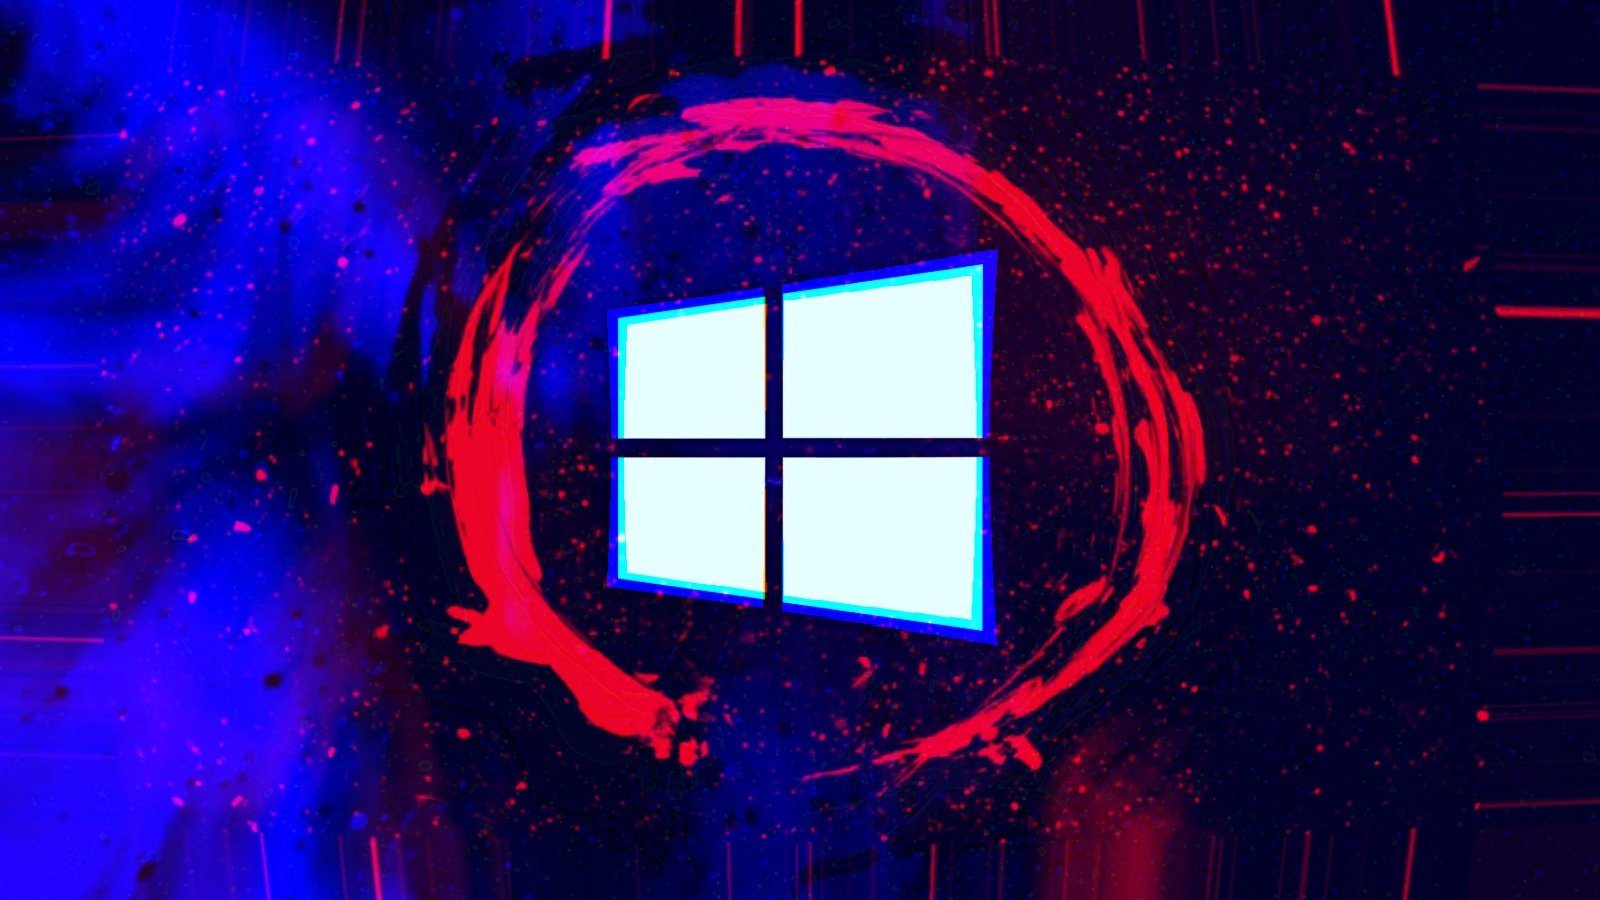 Pirated Windows 10 ISOs install clipper malware via EFI partitions